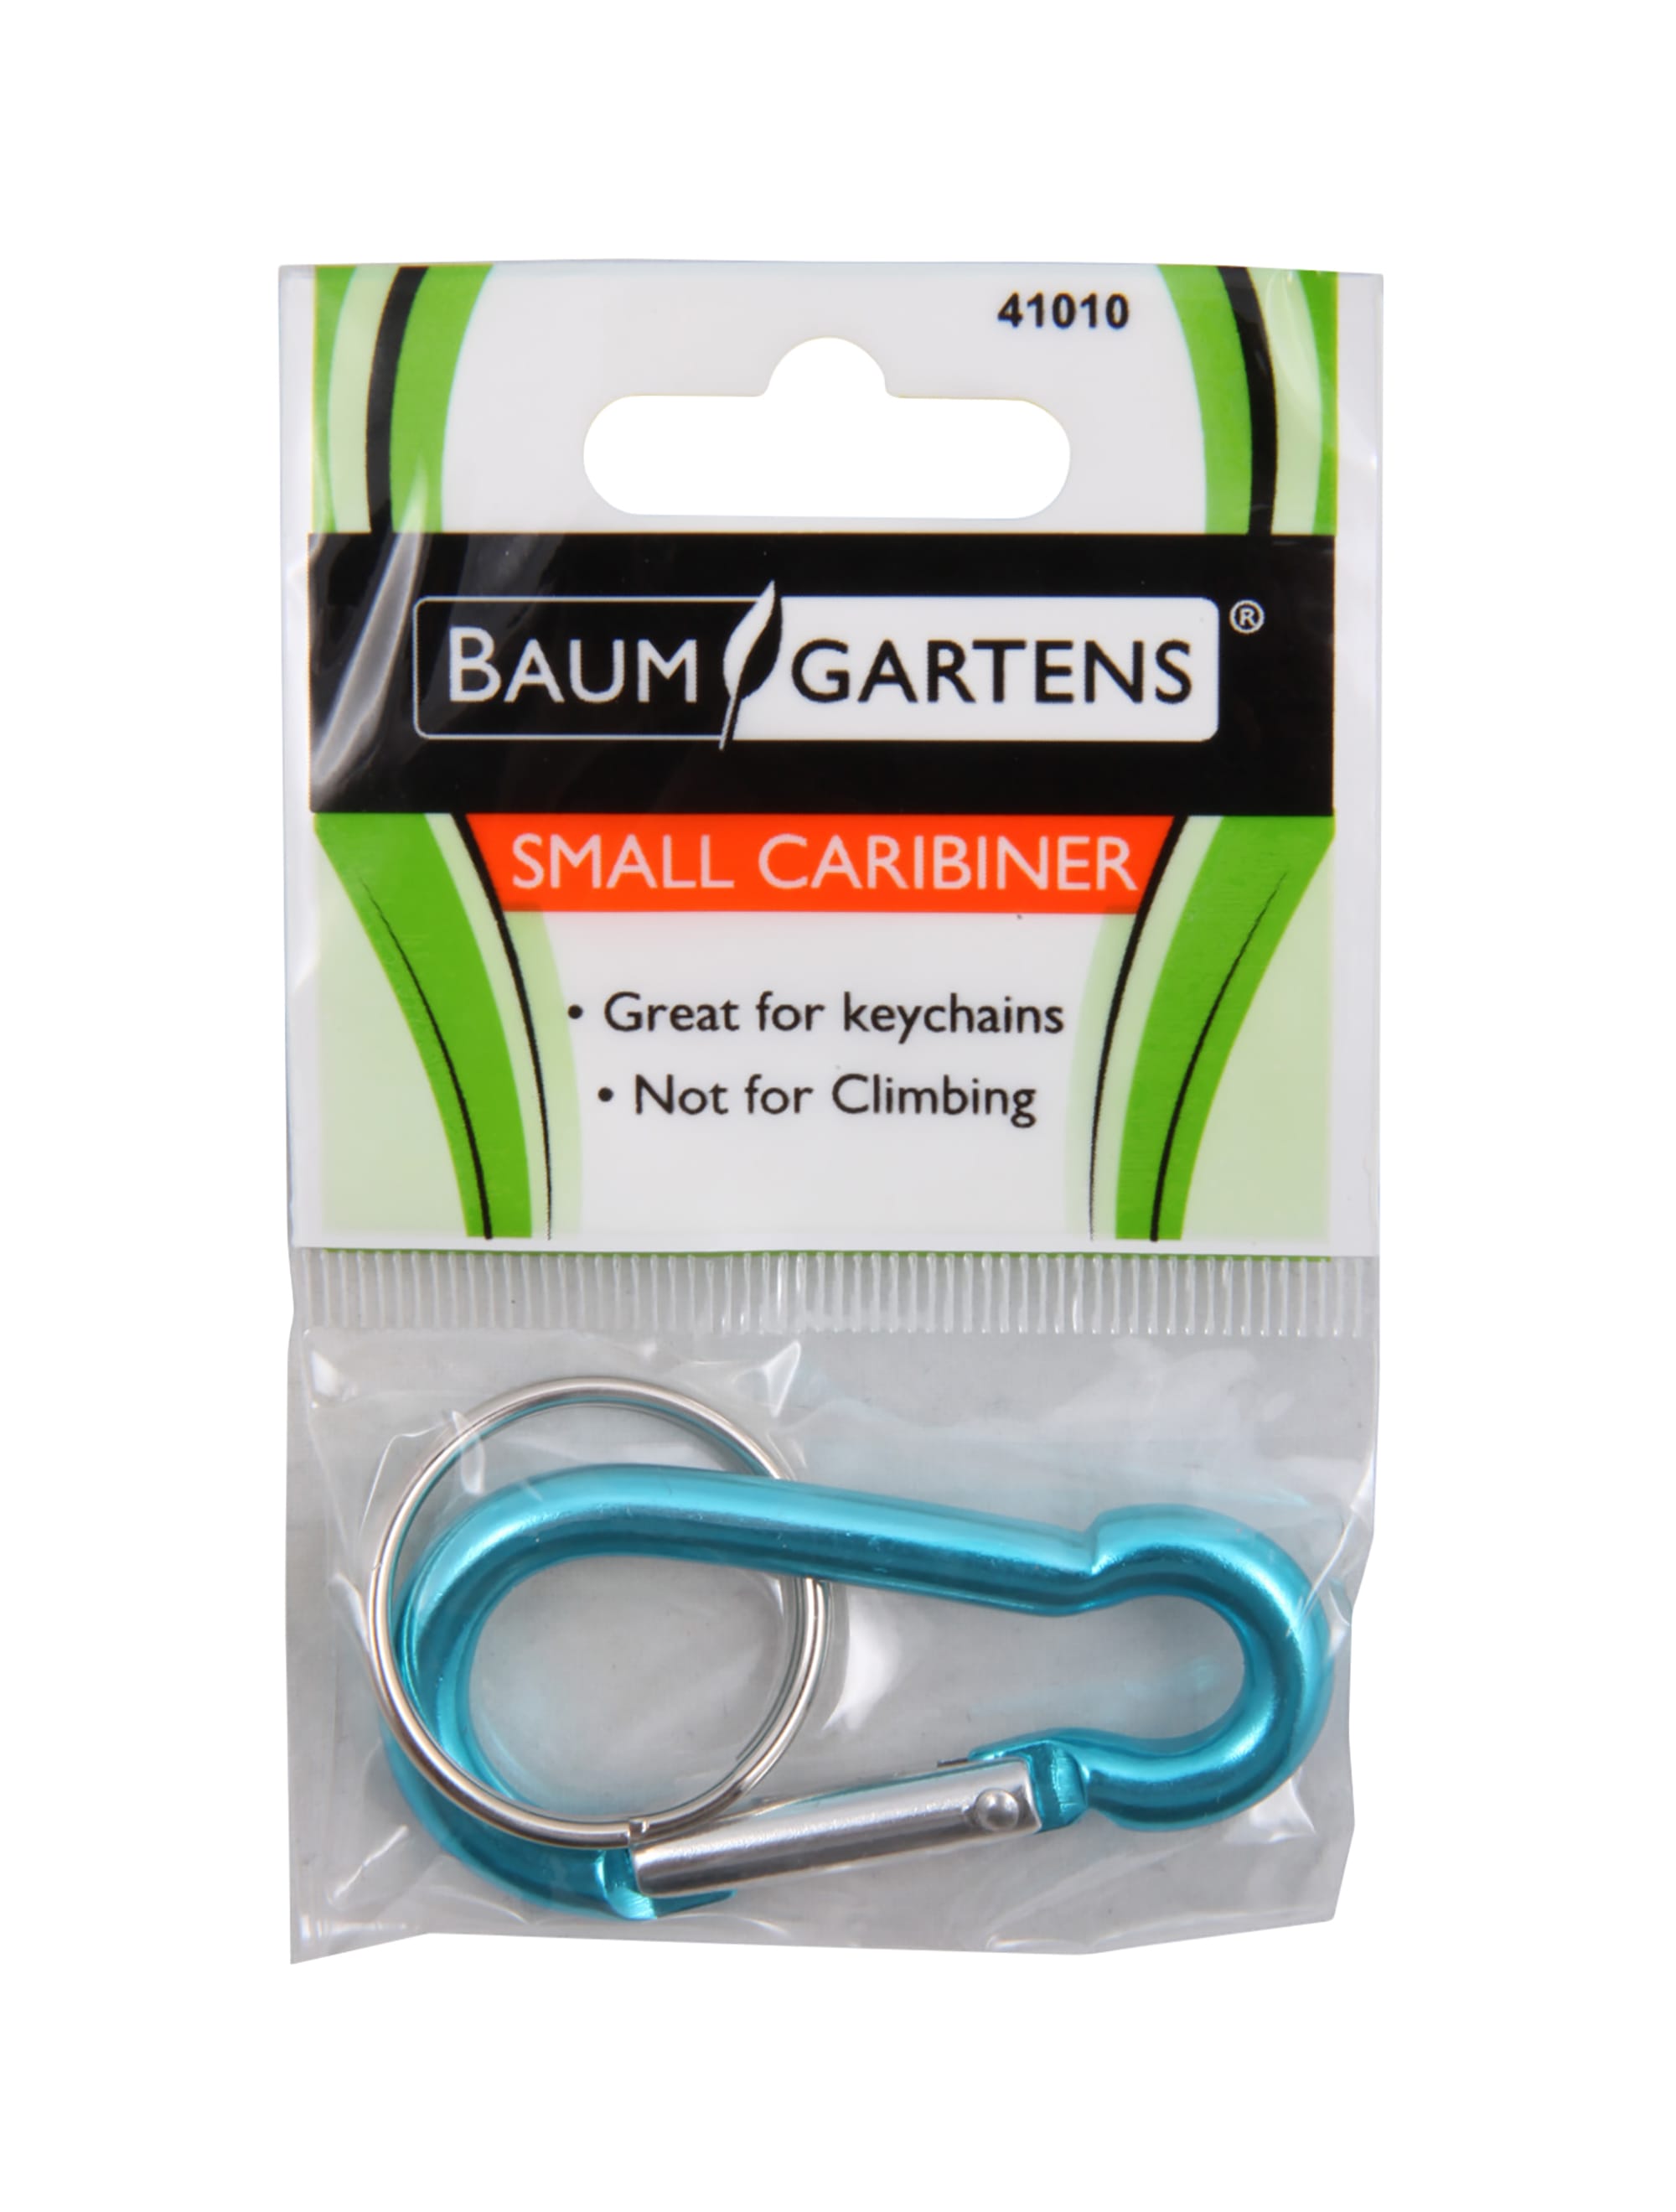 Baumgartens Caribiner Keychain Small Size ASSORTED Colors (41010)